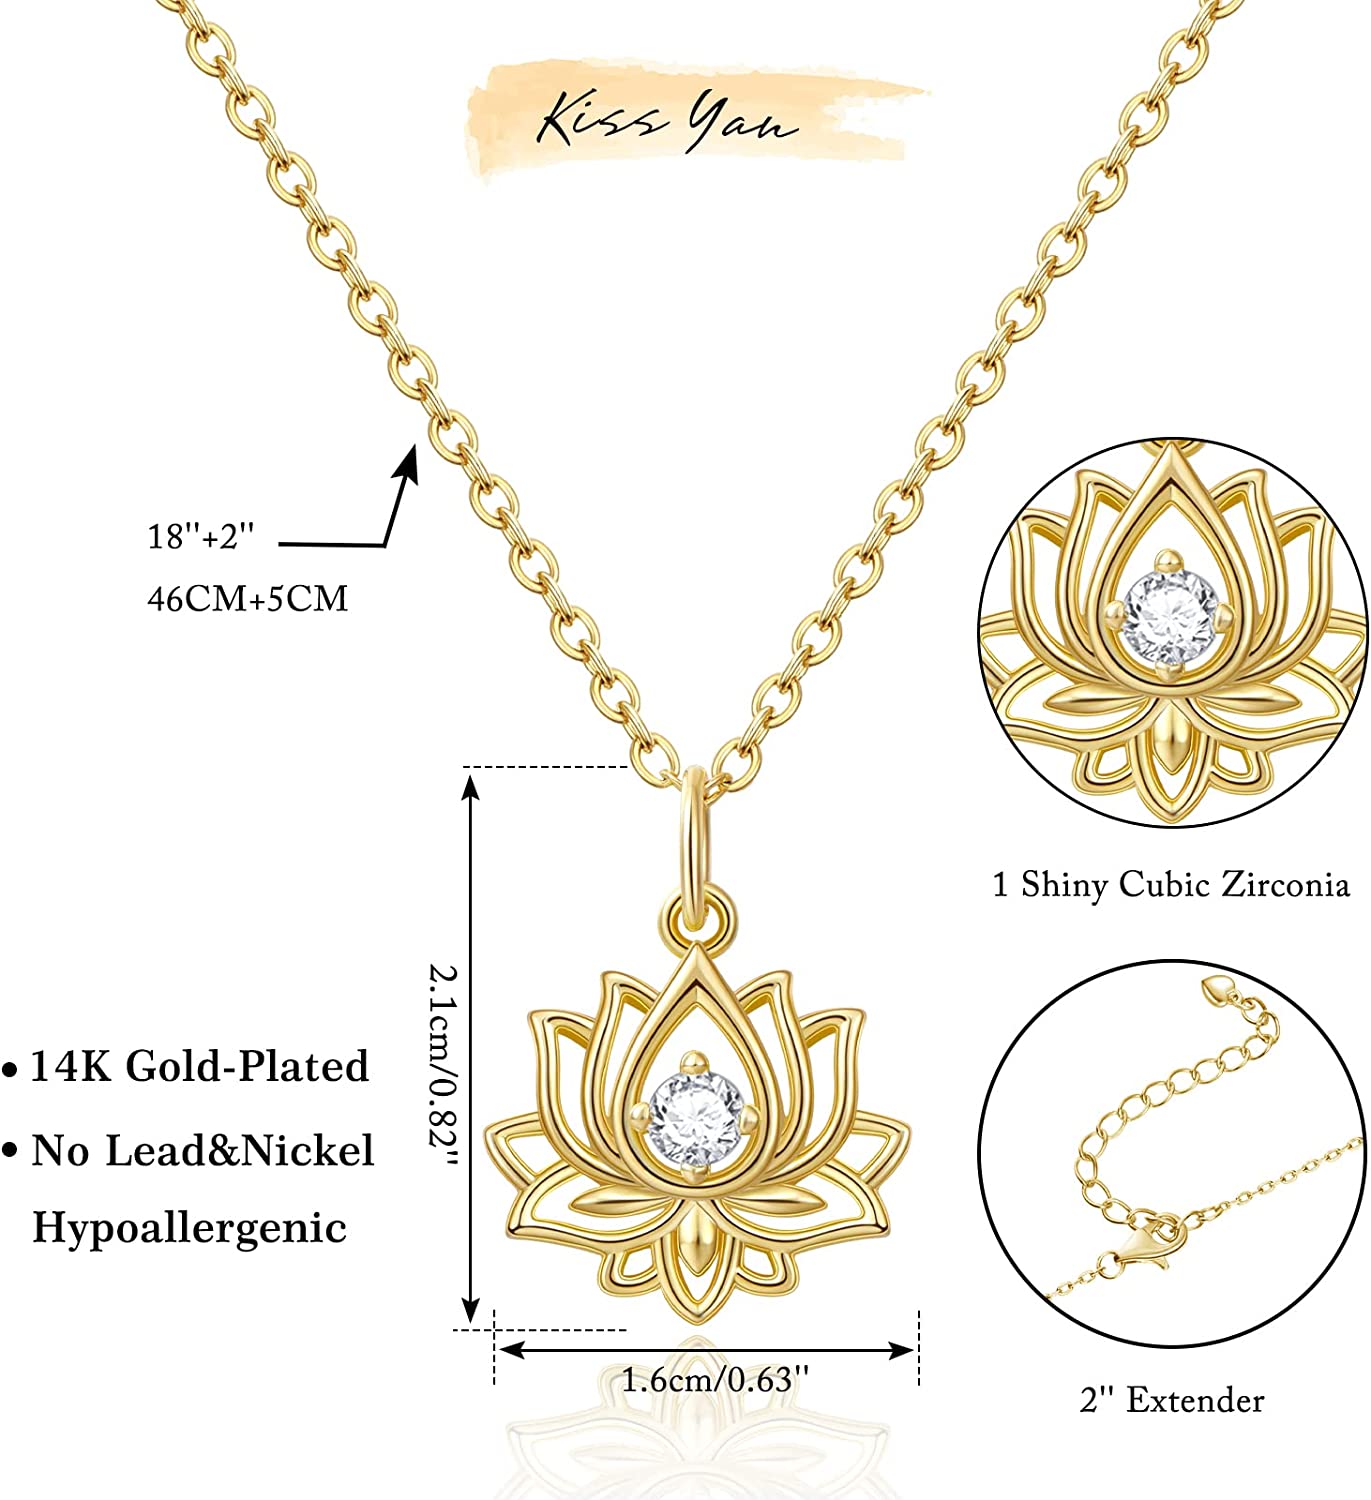 Lotus Flower Charm Necklace —